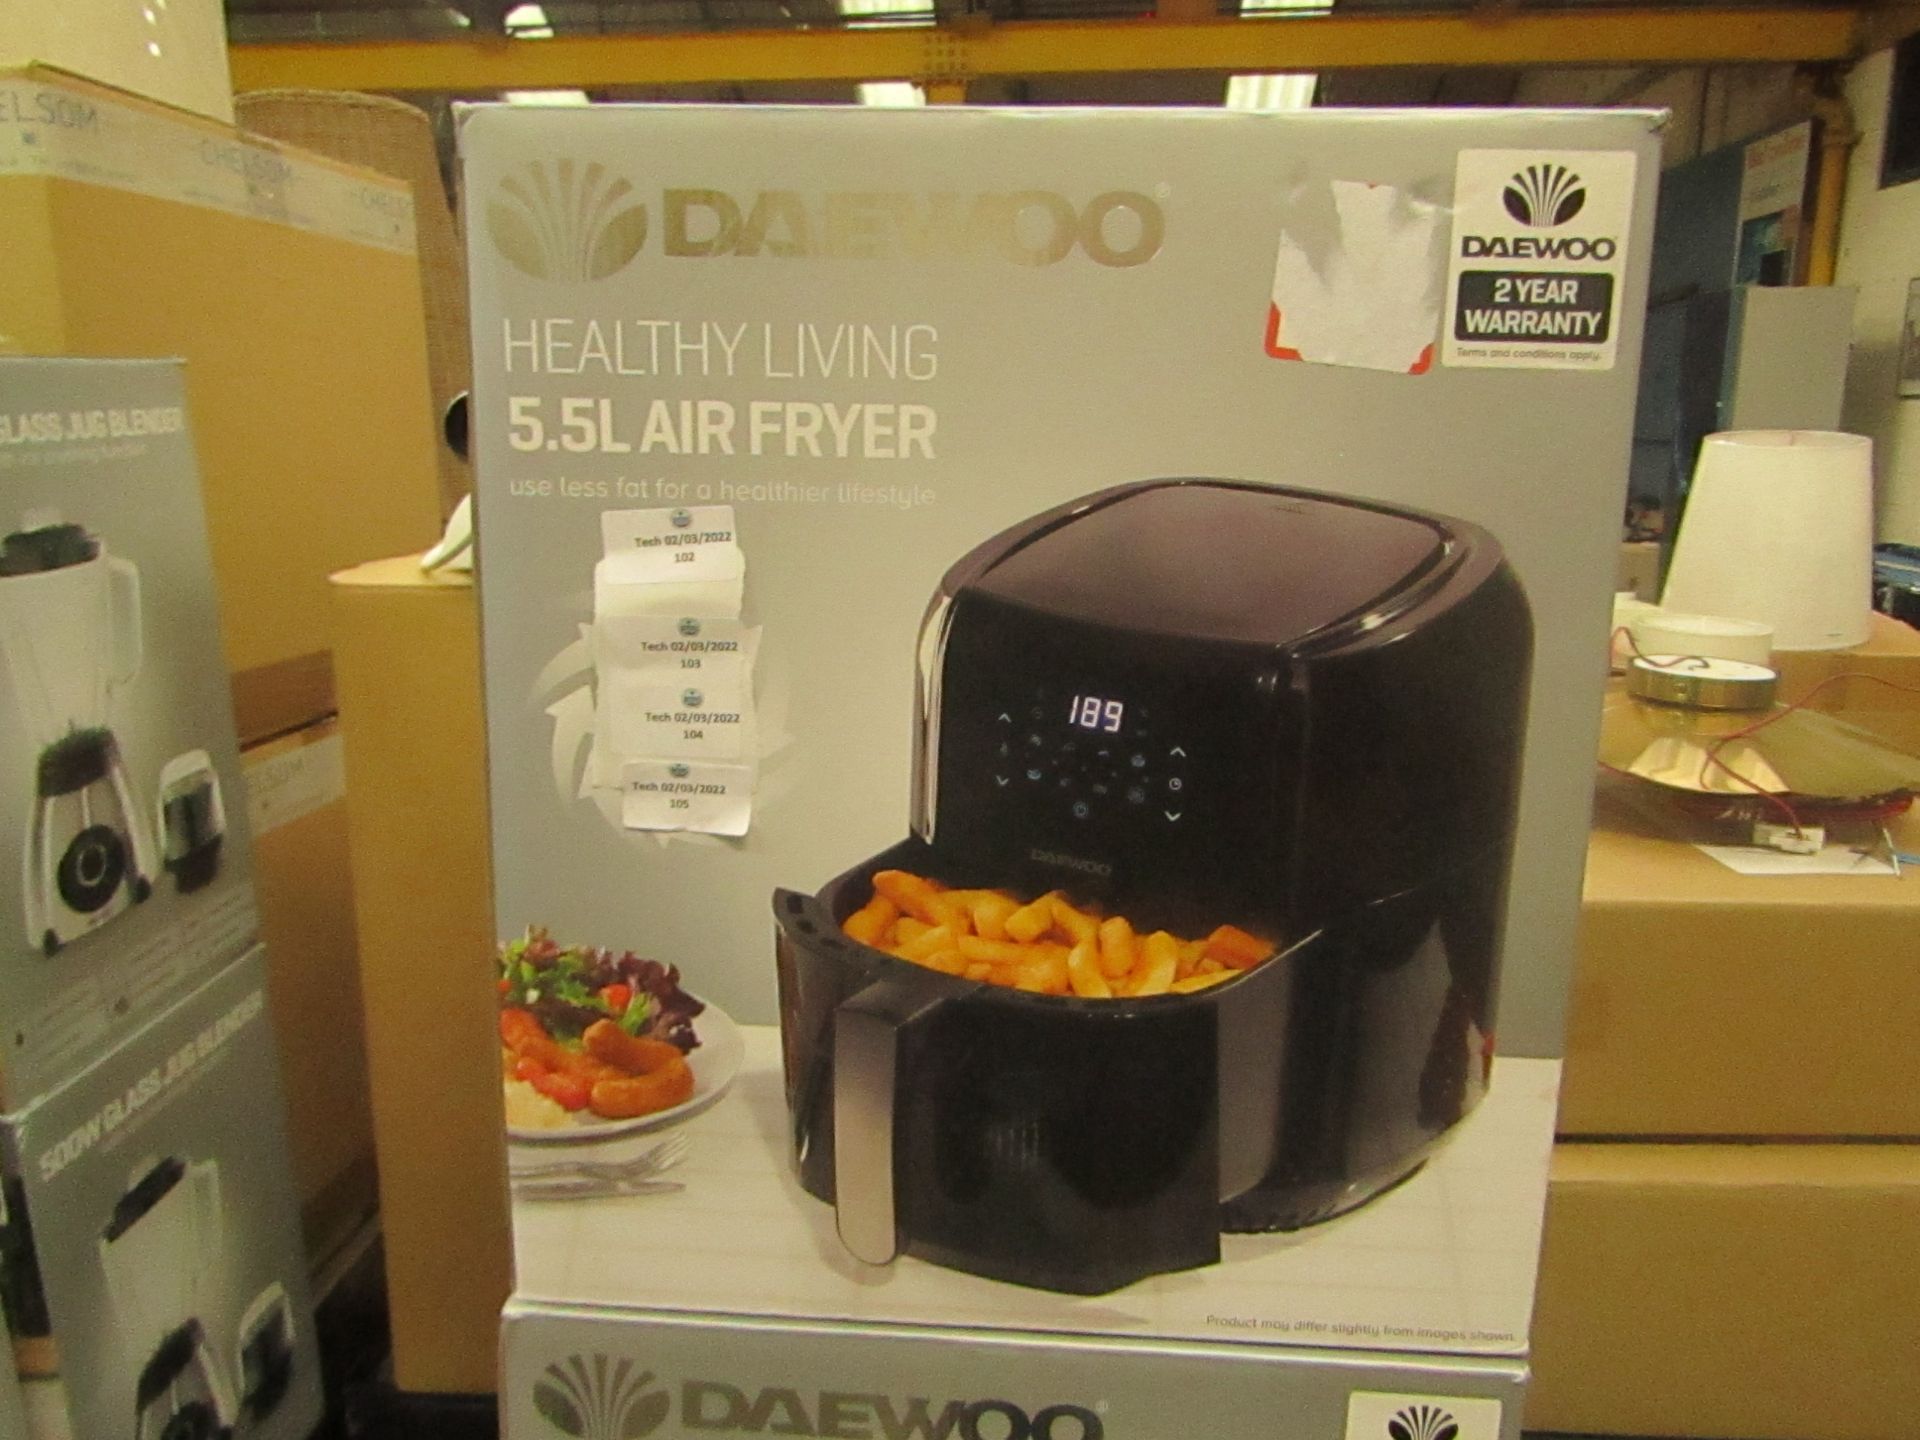 1X Daewoo Healthy Living 5,5L Air Fryer, Item Powers On But We Have Not Tested Any Further, RRP £